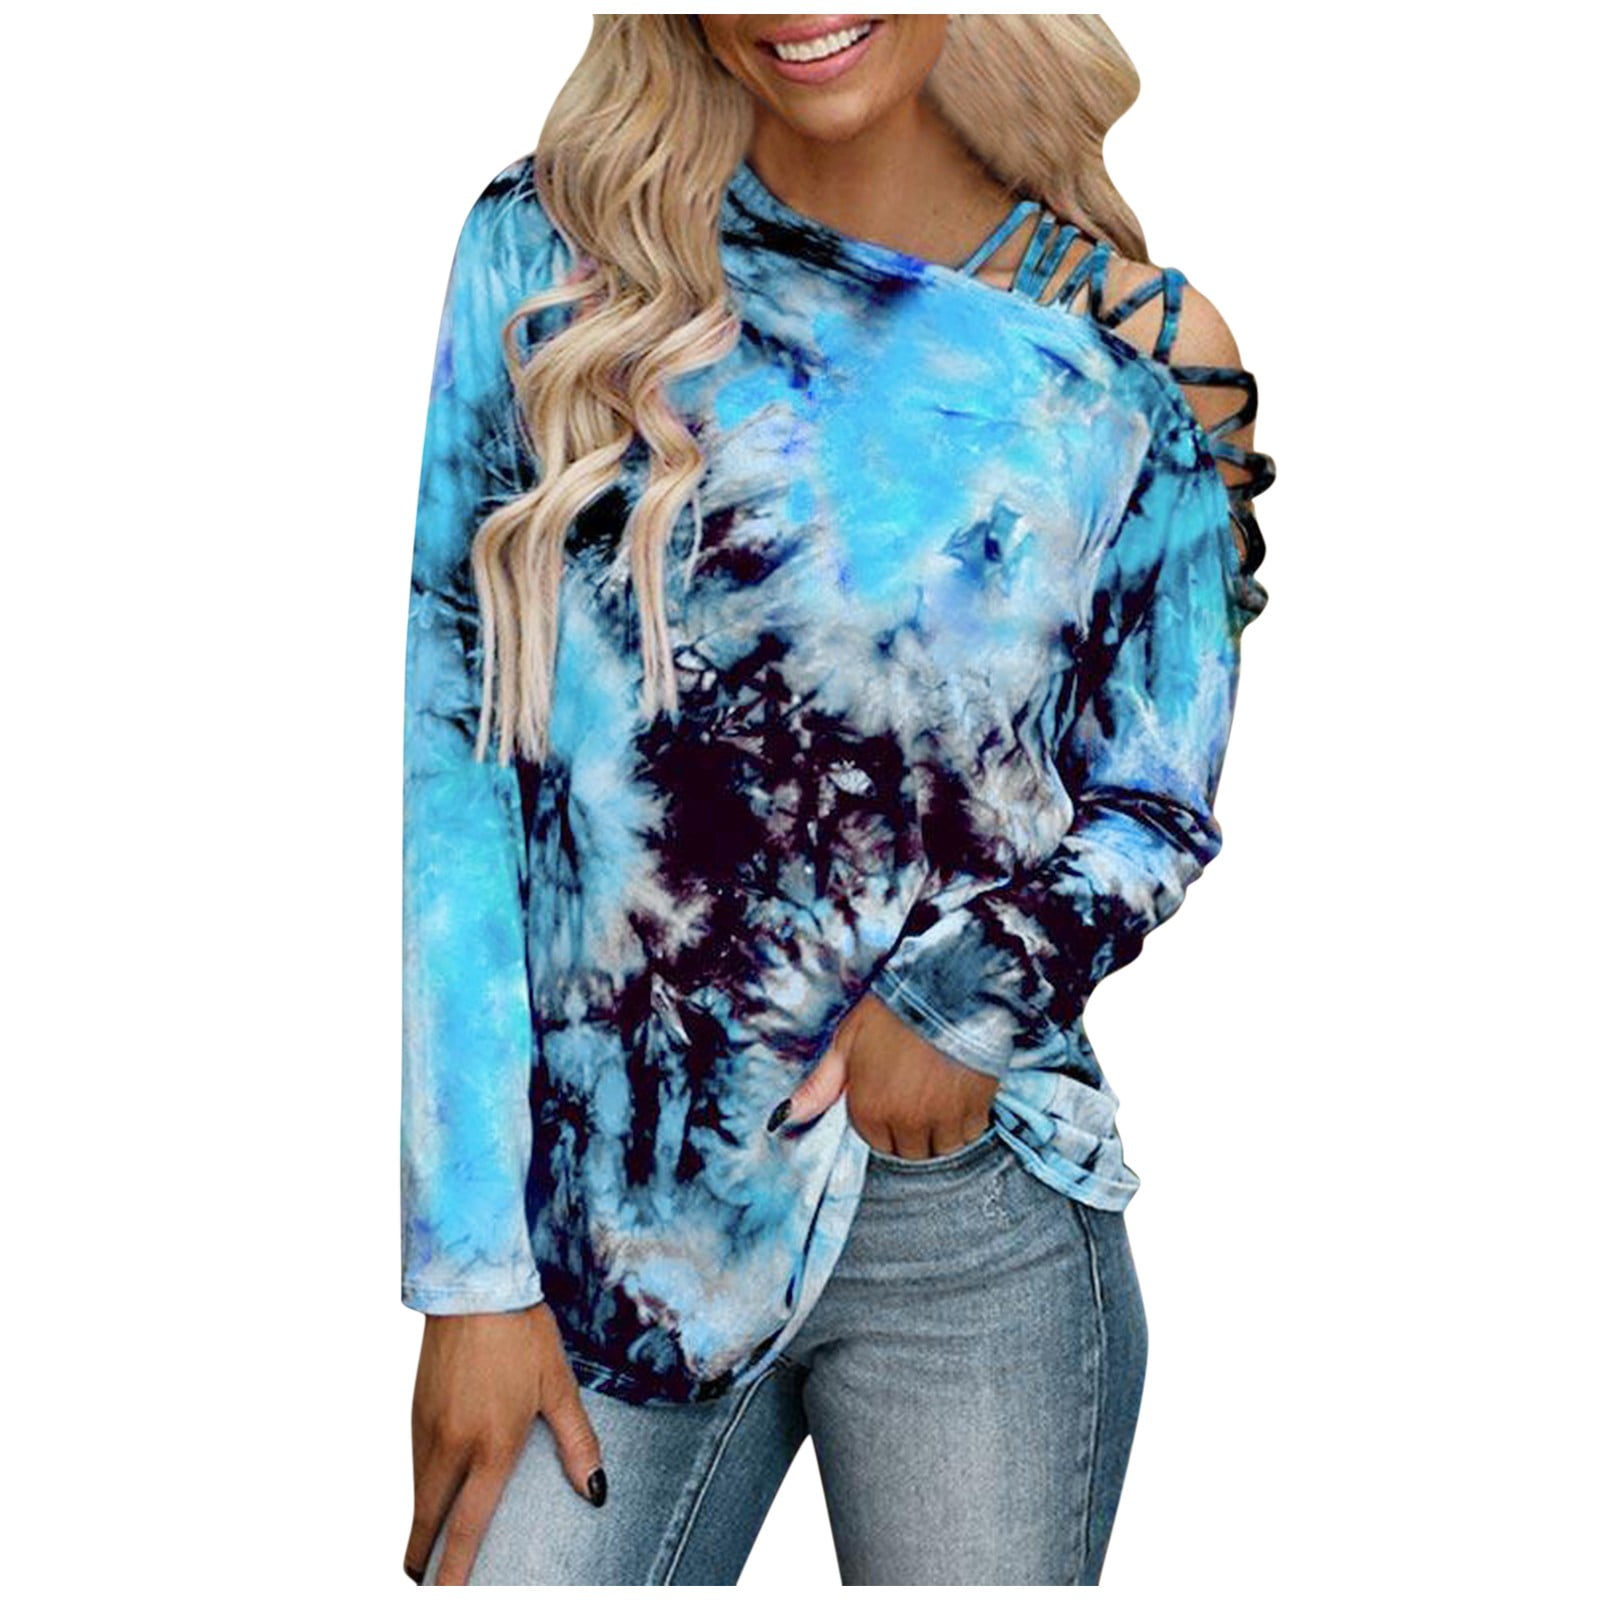 Womens Cold Shoulder Summer T-shirts Ladies Casual Loose Tie-dye Blouse Tee Tops